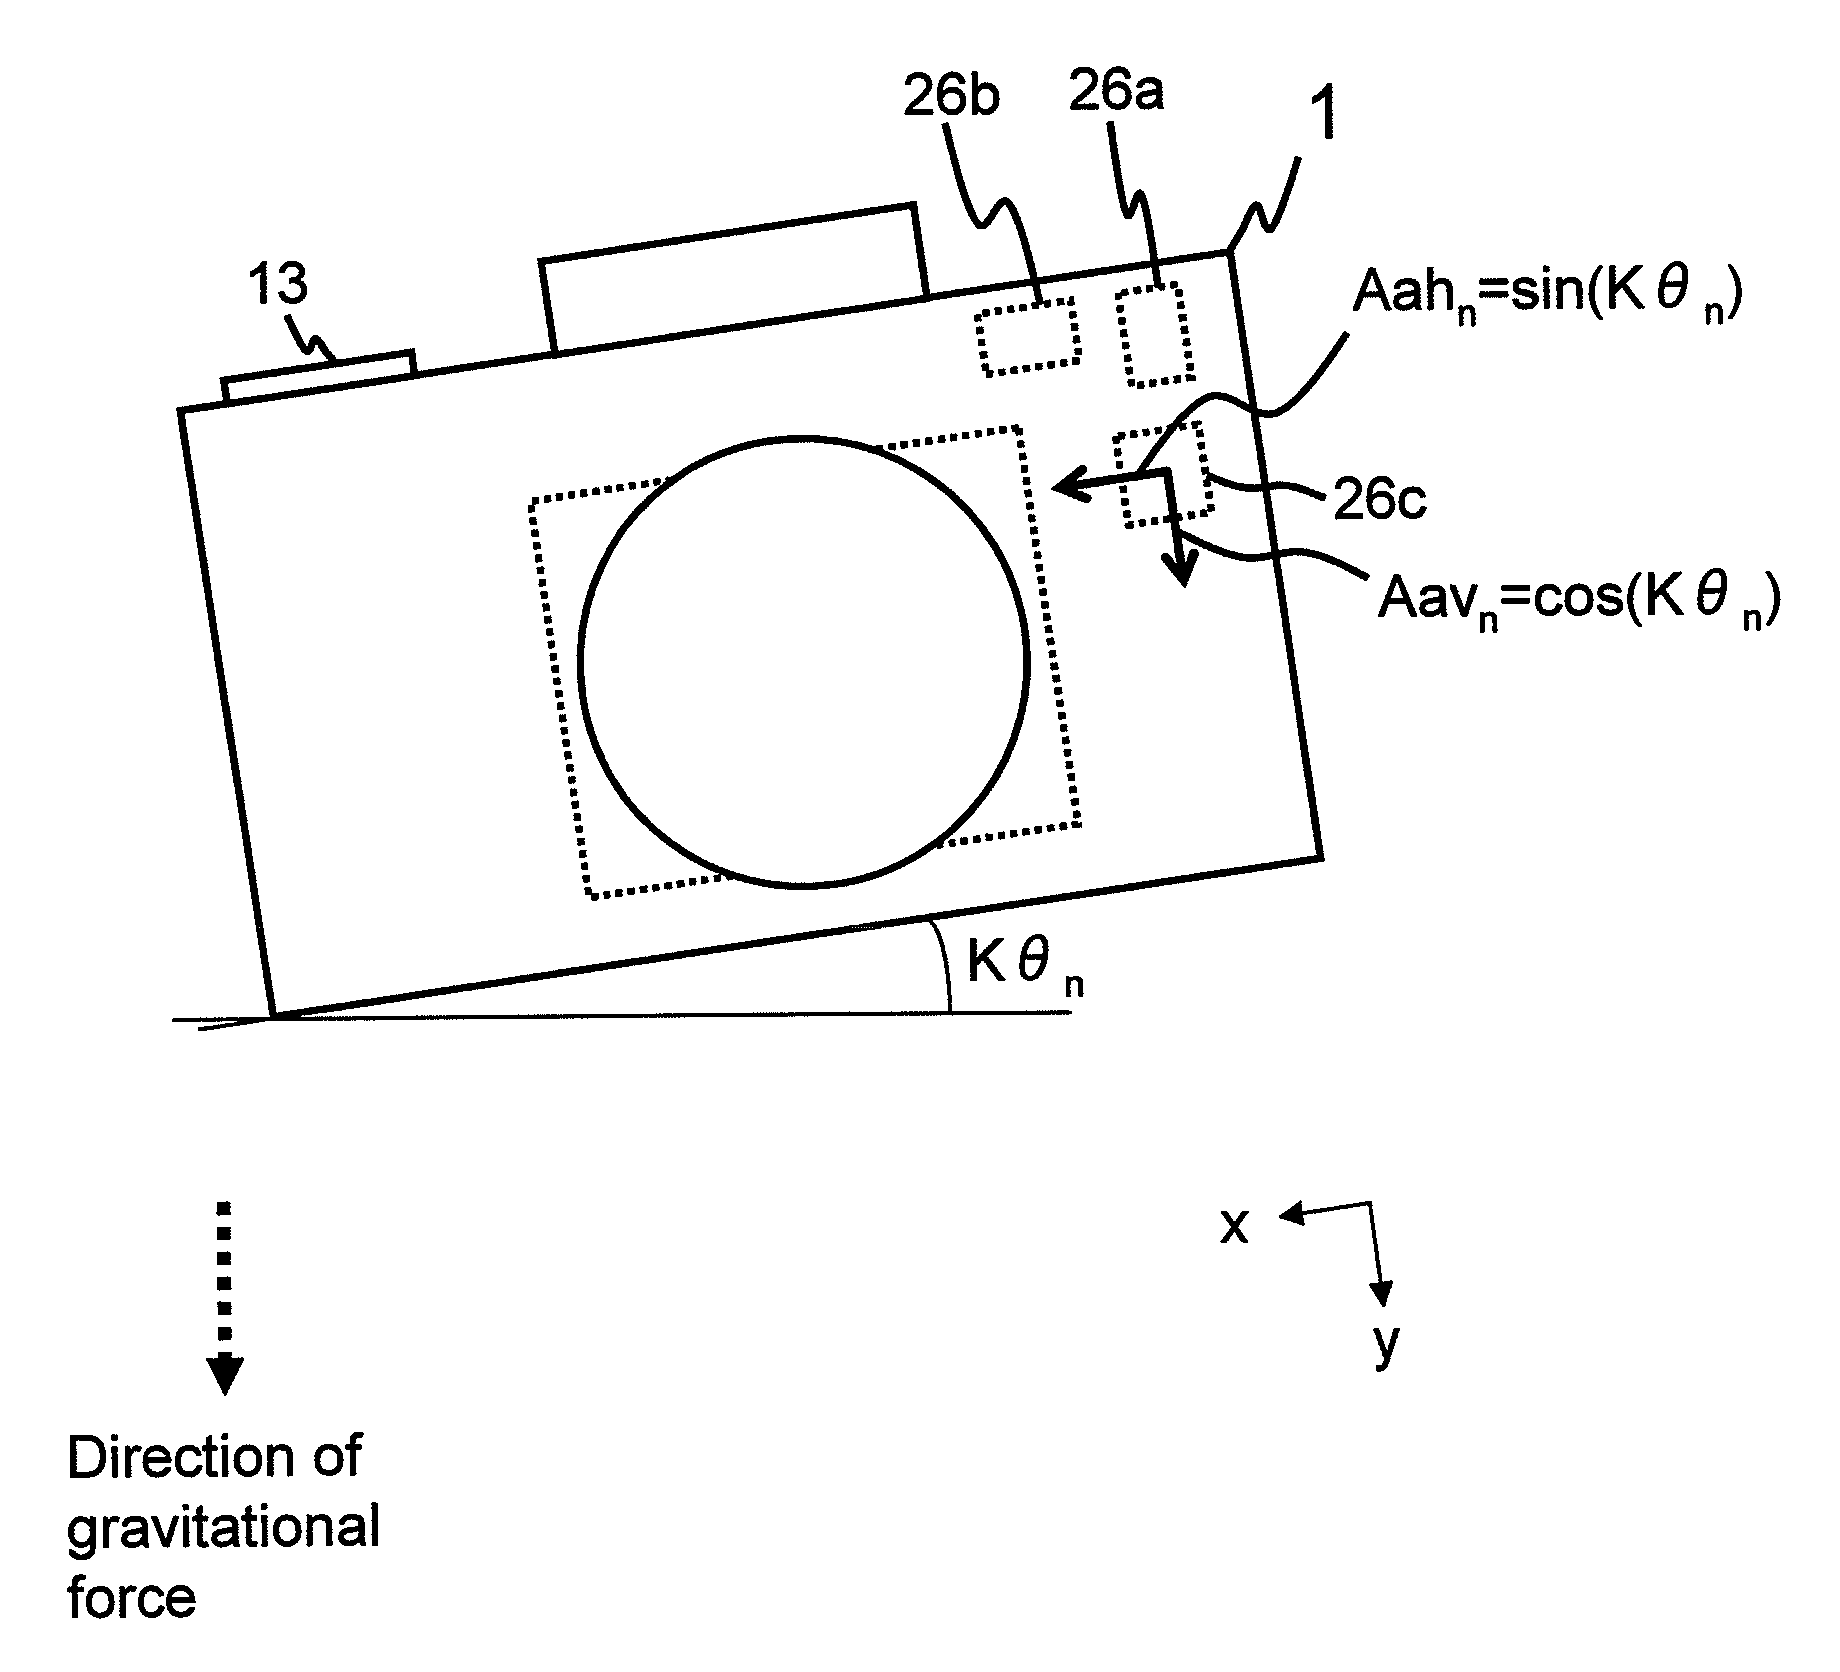 Photographic apparatus for determining whether to perform stabilization on the basis of inclination angle